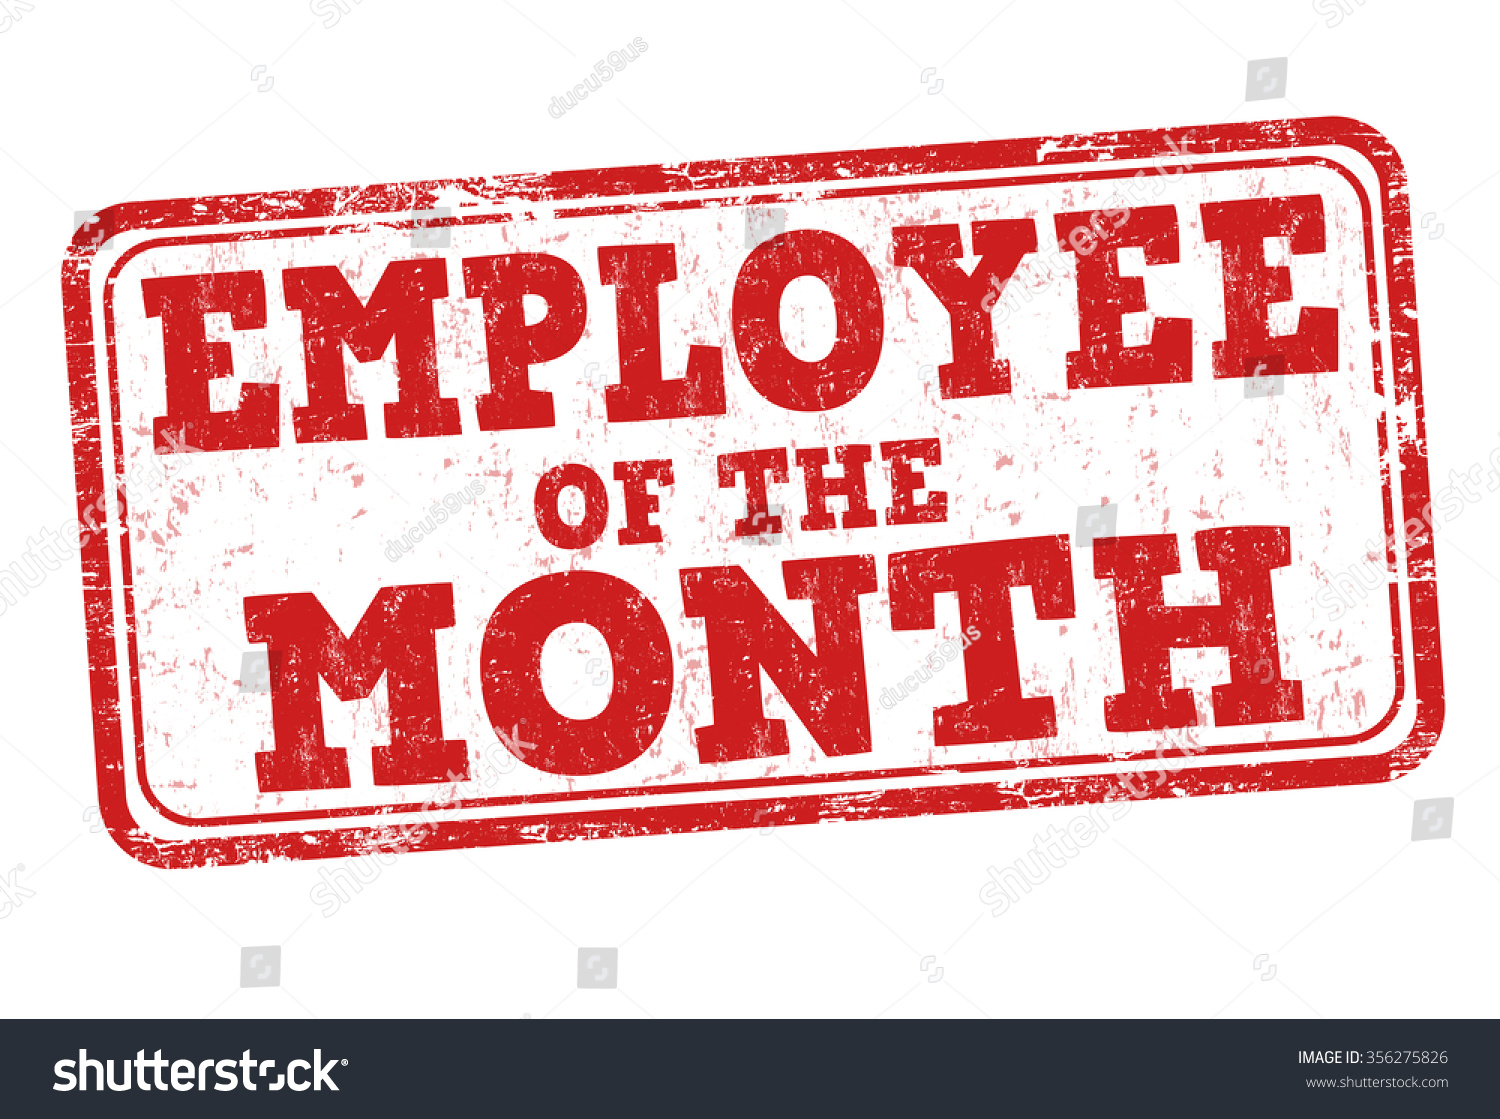 employee of the month clip art - photo #33